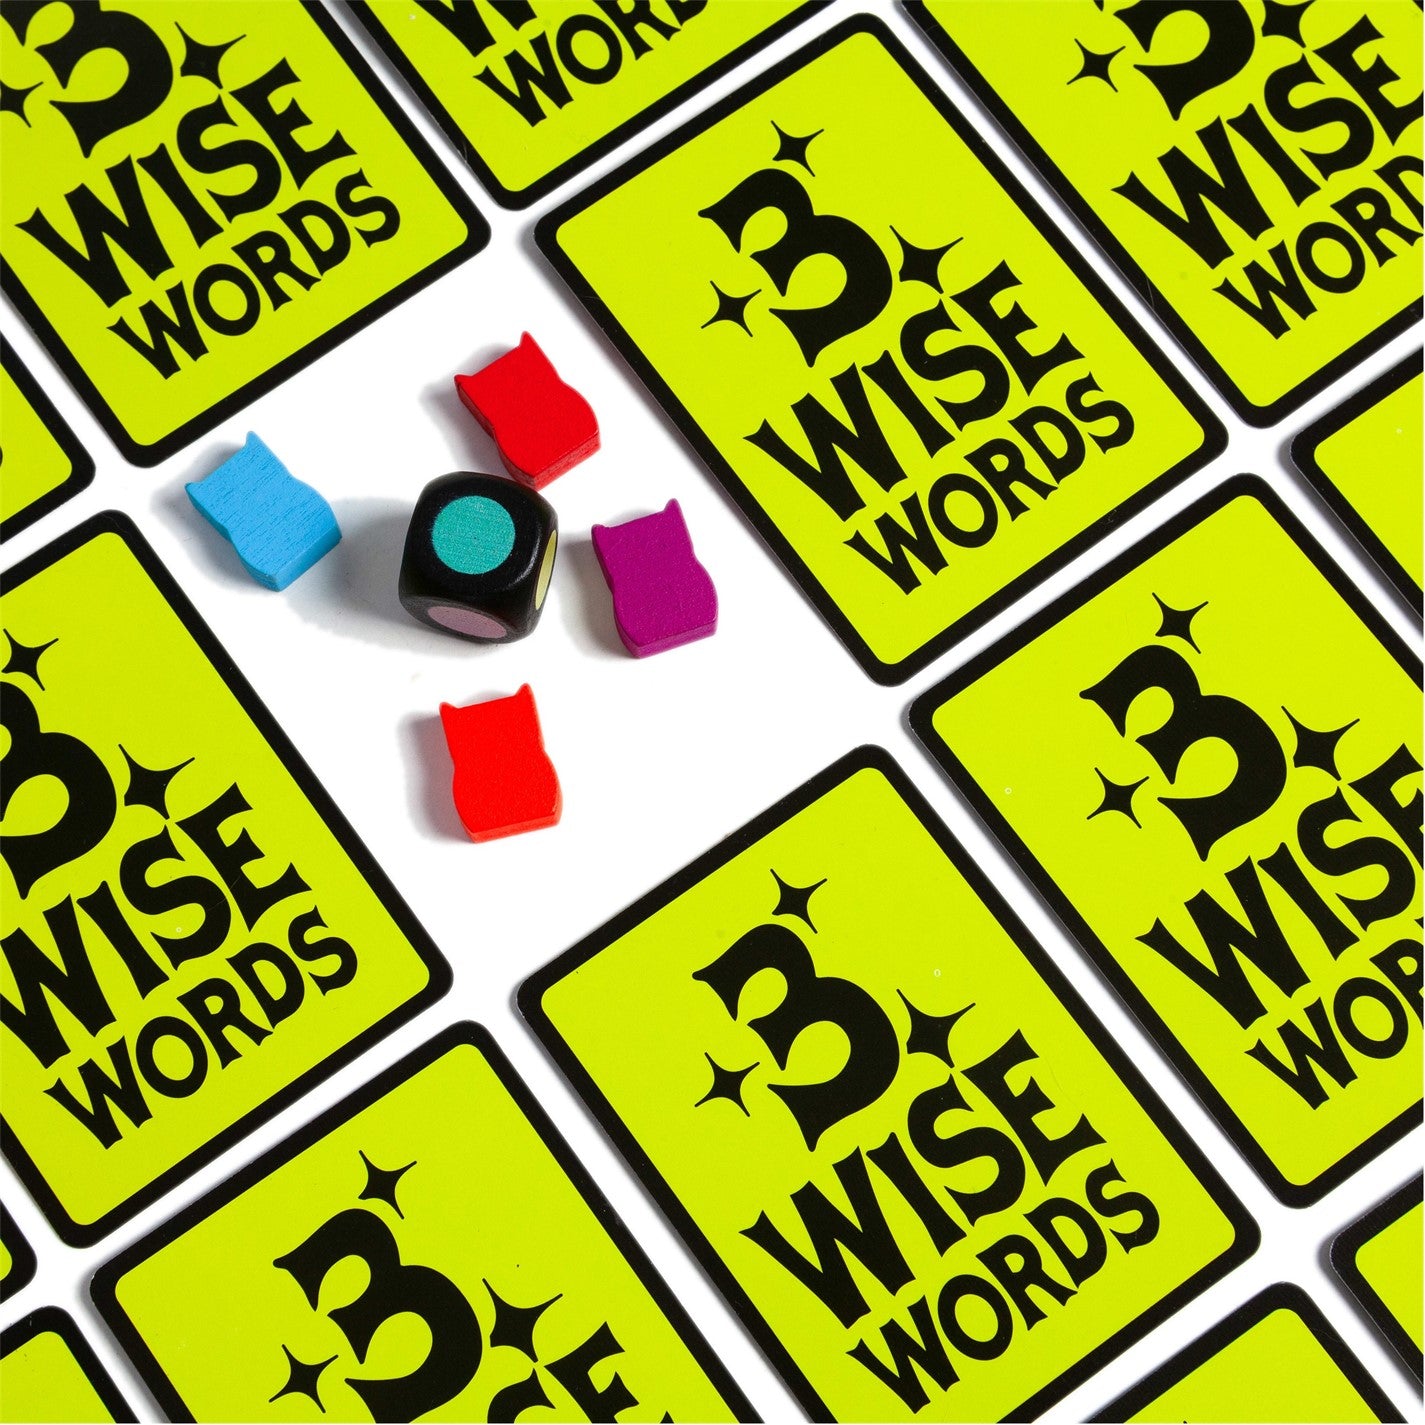 3 Wise Words by Big Potato Games -Birds of a feather, think together! Sold by Board Hoarders